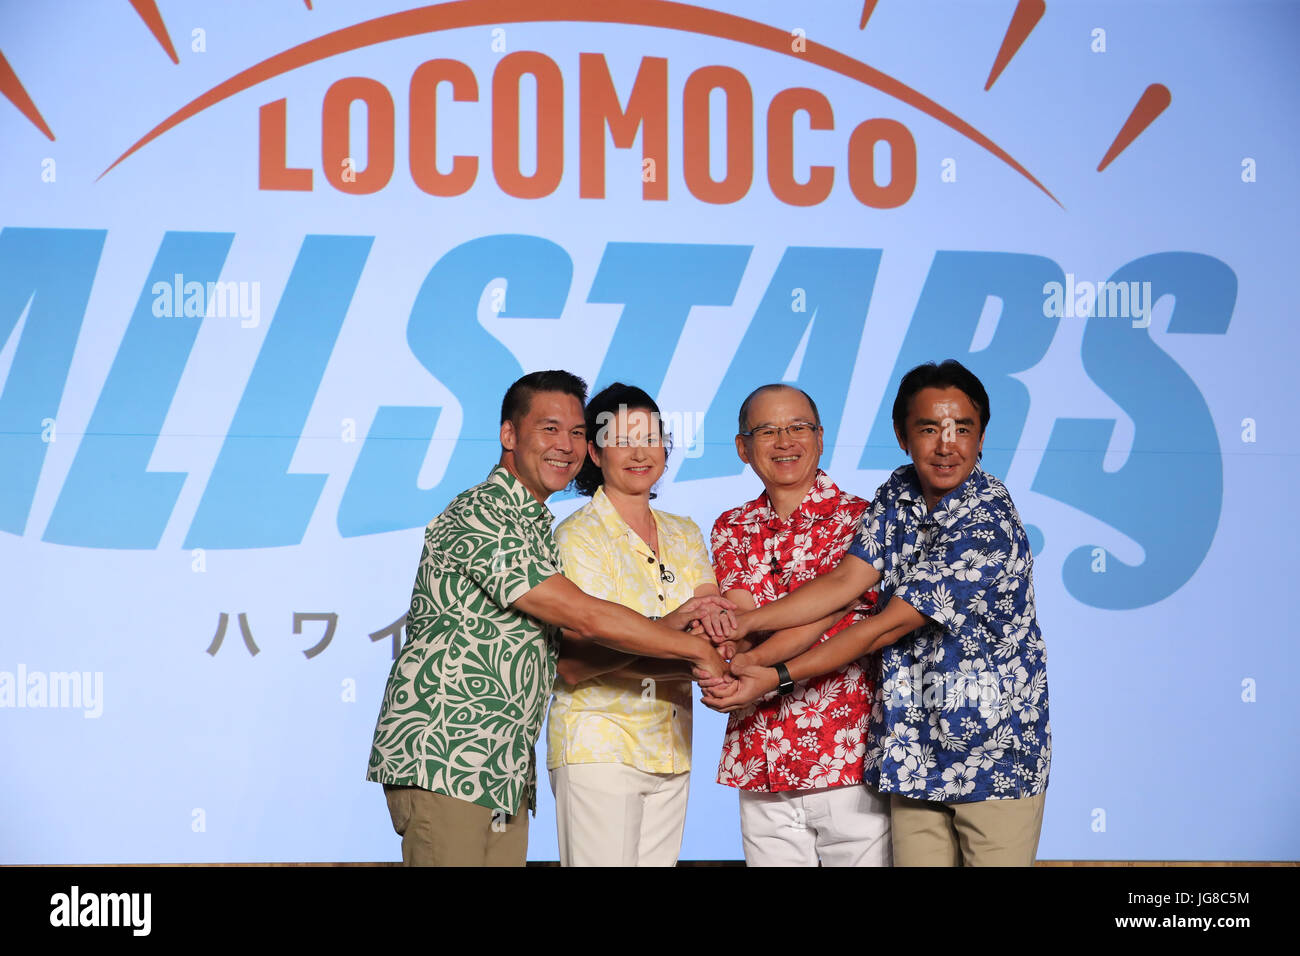 Tokyo, Japan. 4th July, 2017. (L-R) Eric Takahata, managing director of Hawaii Tourism Japan, McDonald's Japan president Sarah Casanova, Skylark president Makoto Tani and Lawson president Sadanobu Takemasu announce that they will collaborate to promote Hawaiian food 'Locomoco' for their restaurants and convenience stores in Japan from July 11 at a presentation in Tokyo on Tuesday, July 4, 2017. McDonald's will provide 'Locomoco' burger and Gusto restaurant chain will provide 'Cheese in Locomoco bowl'. Credit: Yoshio Tsunoda/AFLO/Alamy Live News Stock Photo